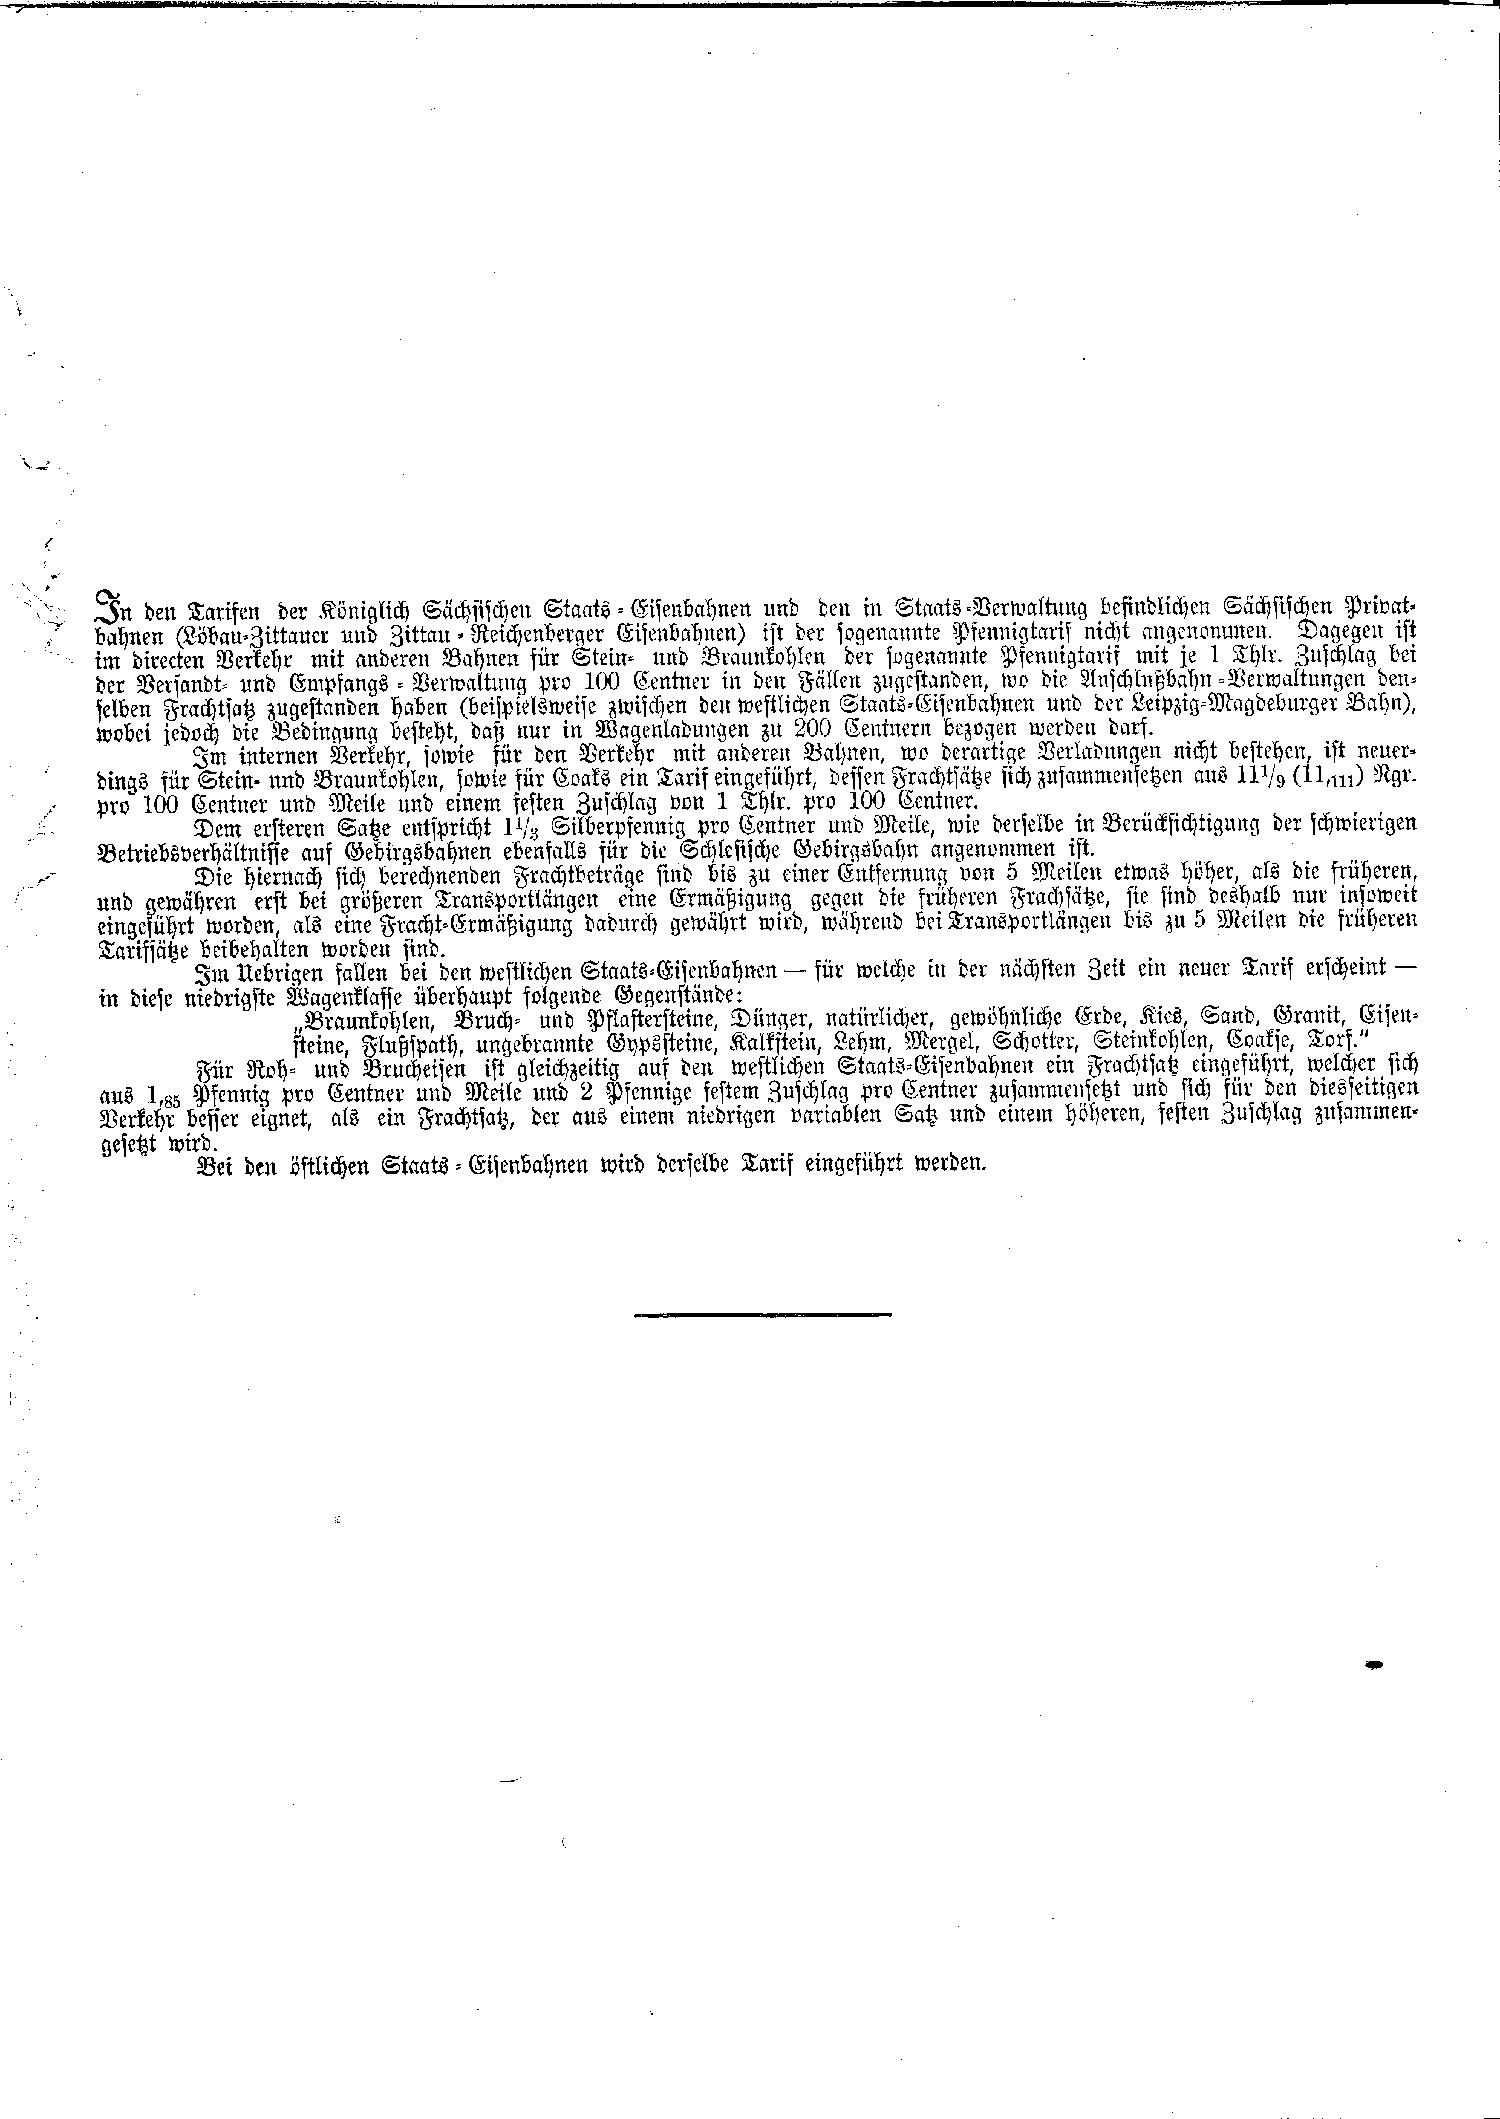 Scan of page 542